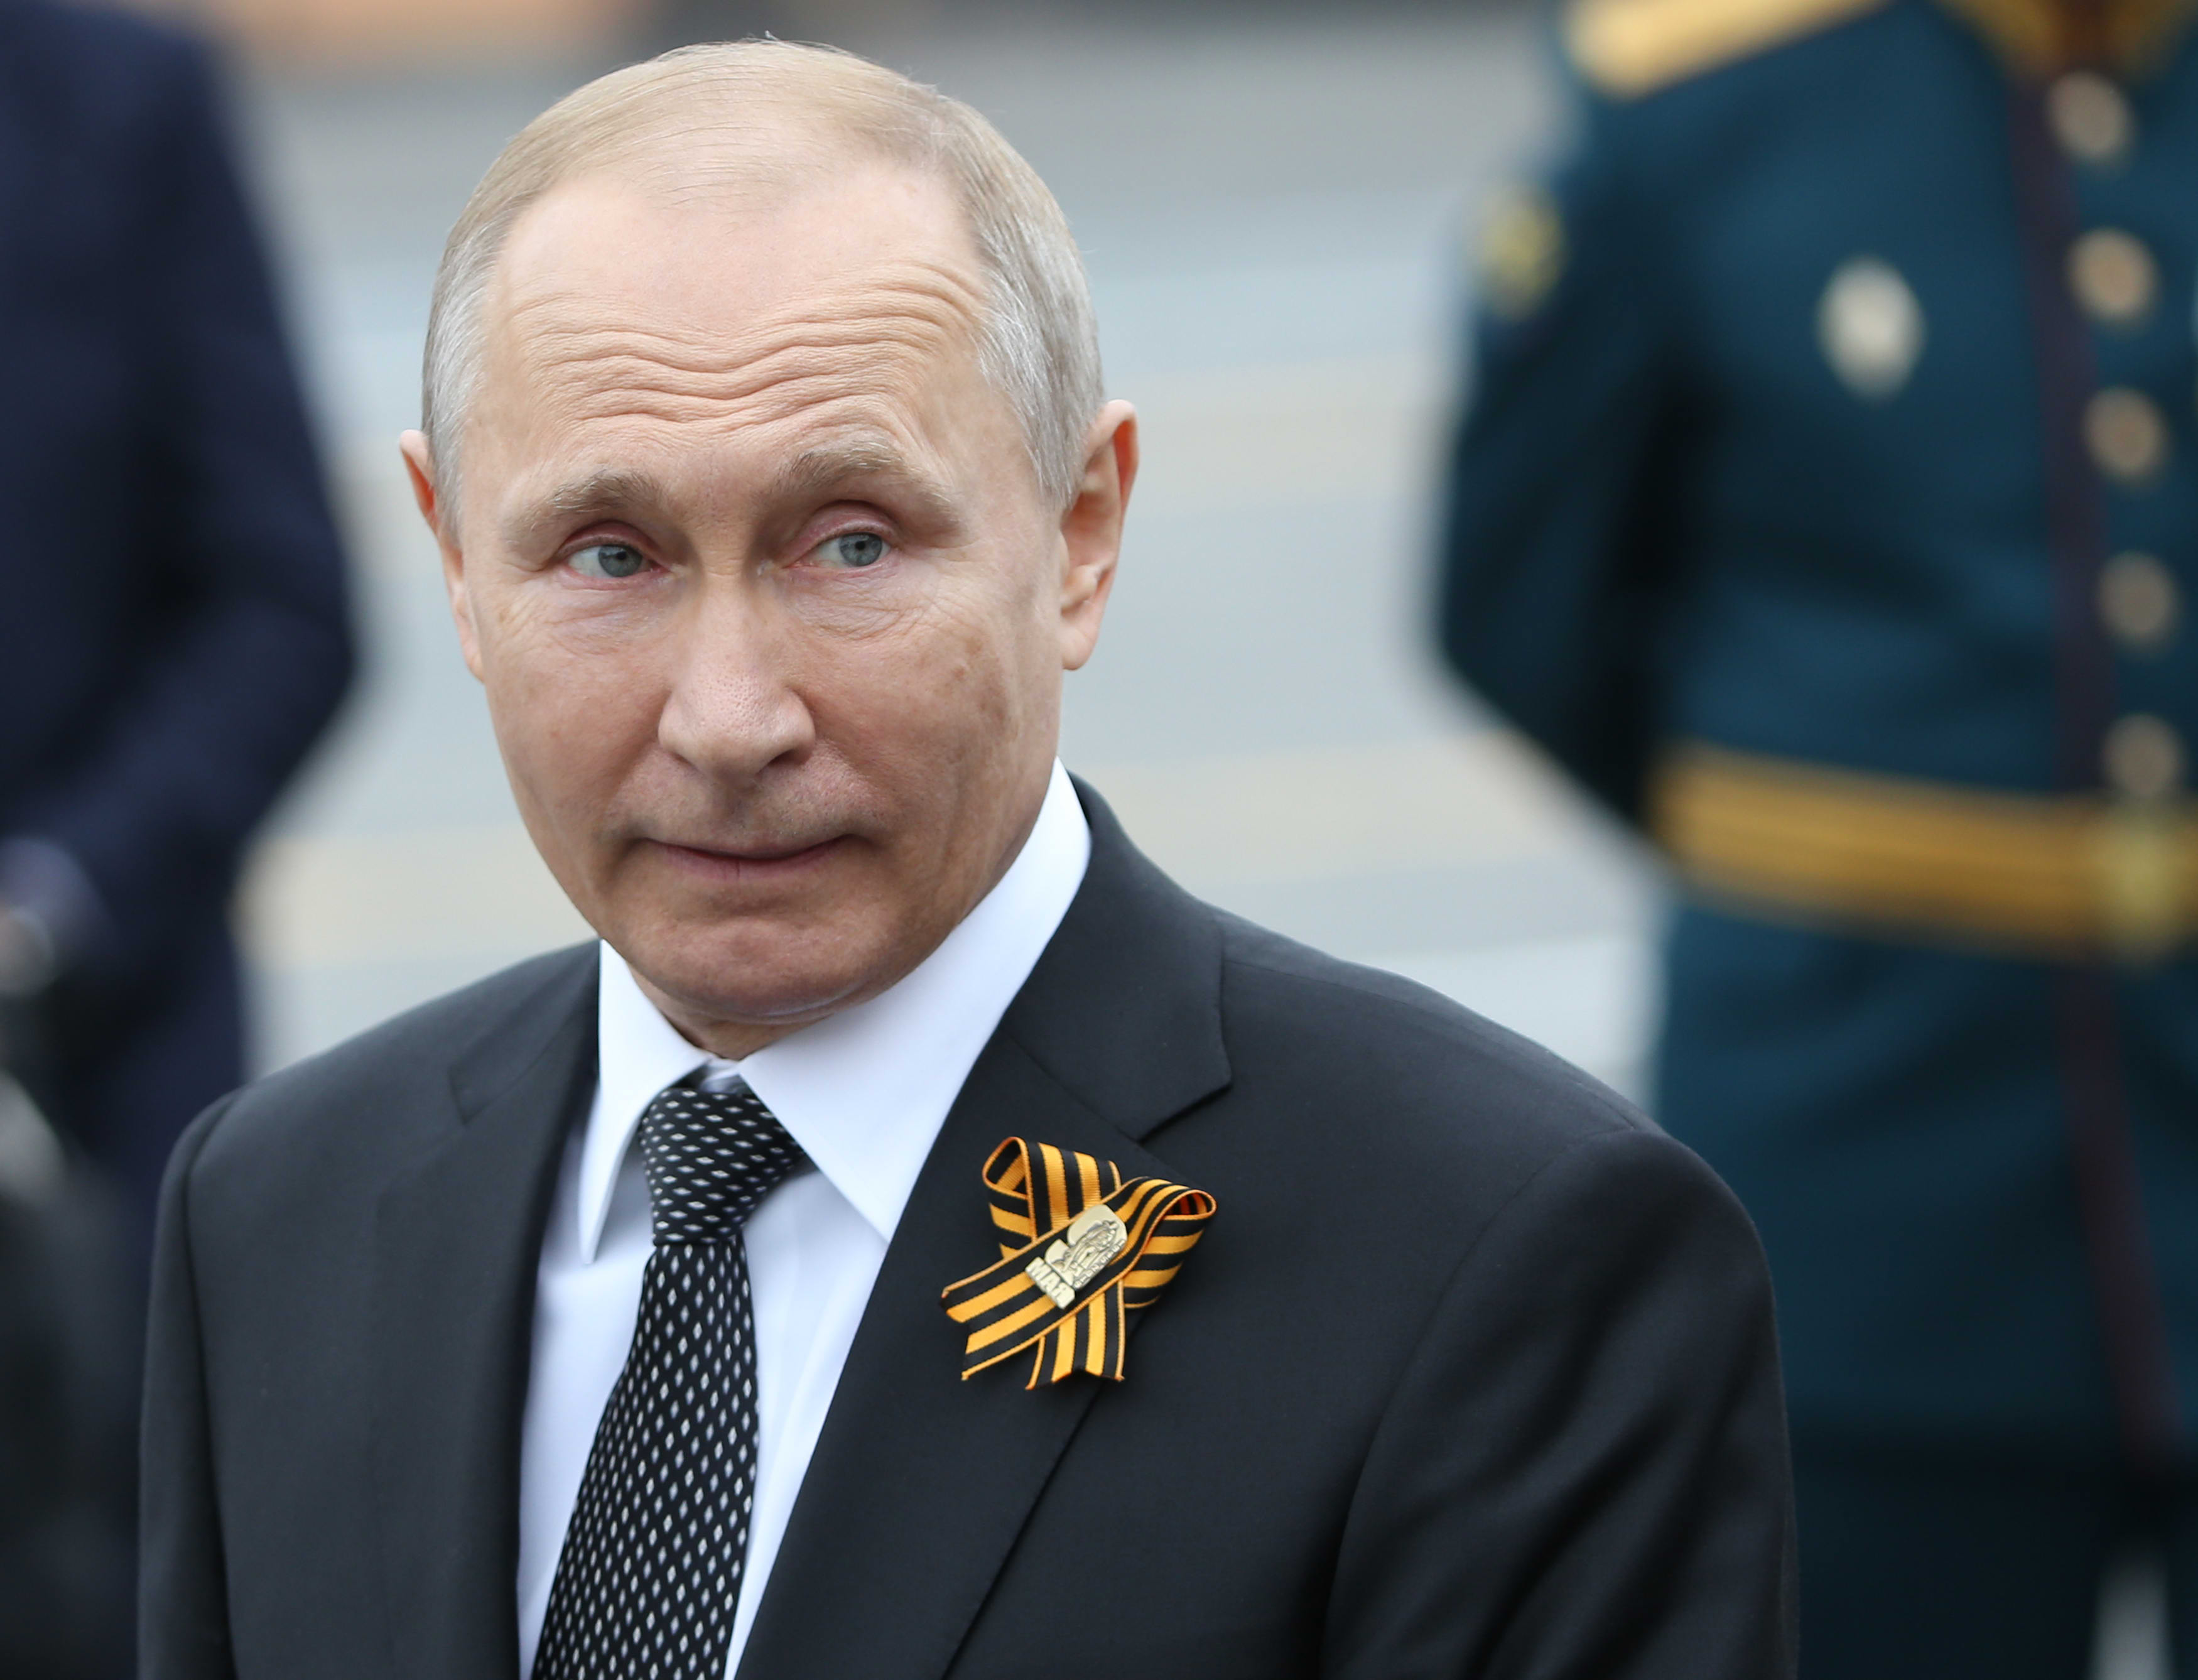 Investing Club: Cramer says history shows the risk of buying stocks based on what Putin says